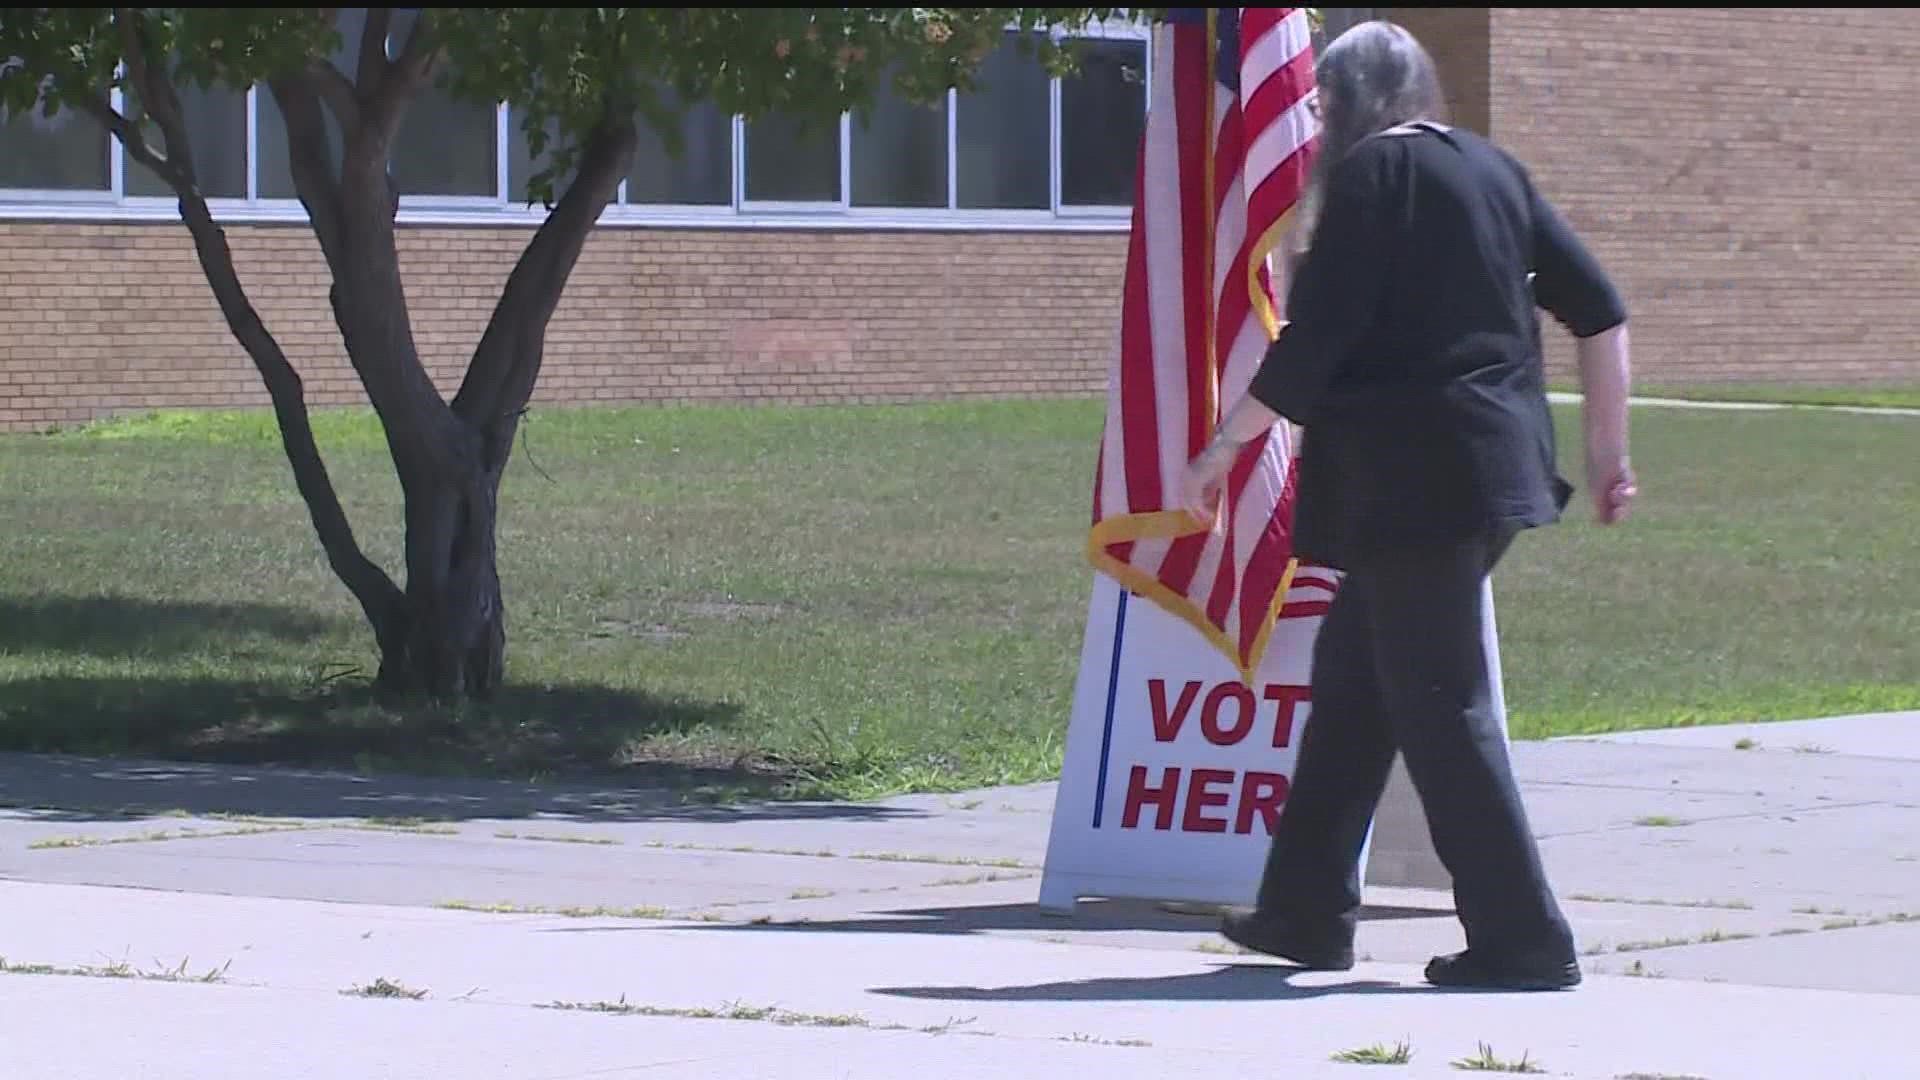 Doors open at polling places at 8 a.m.